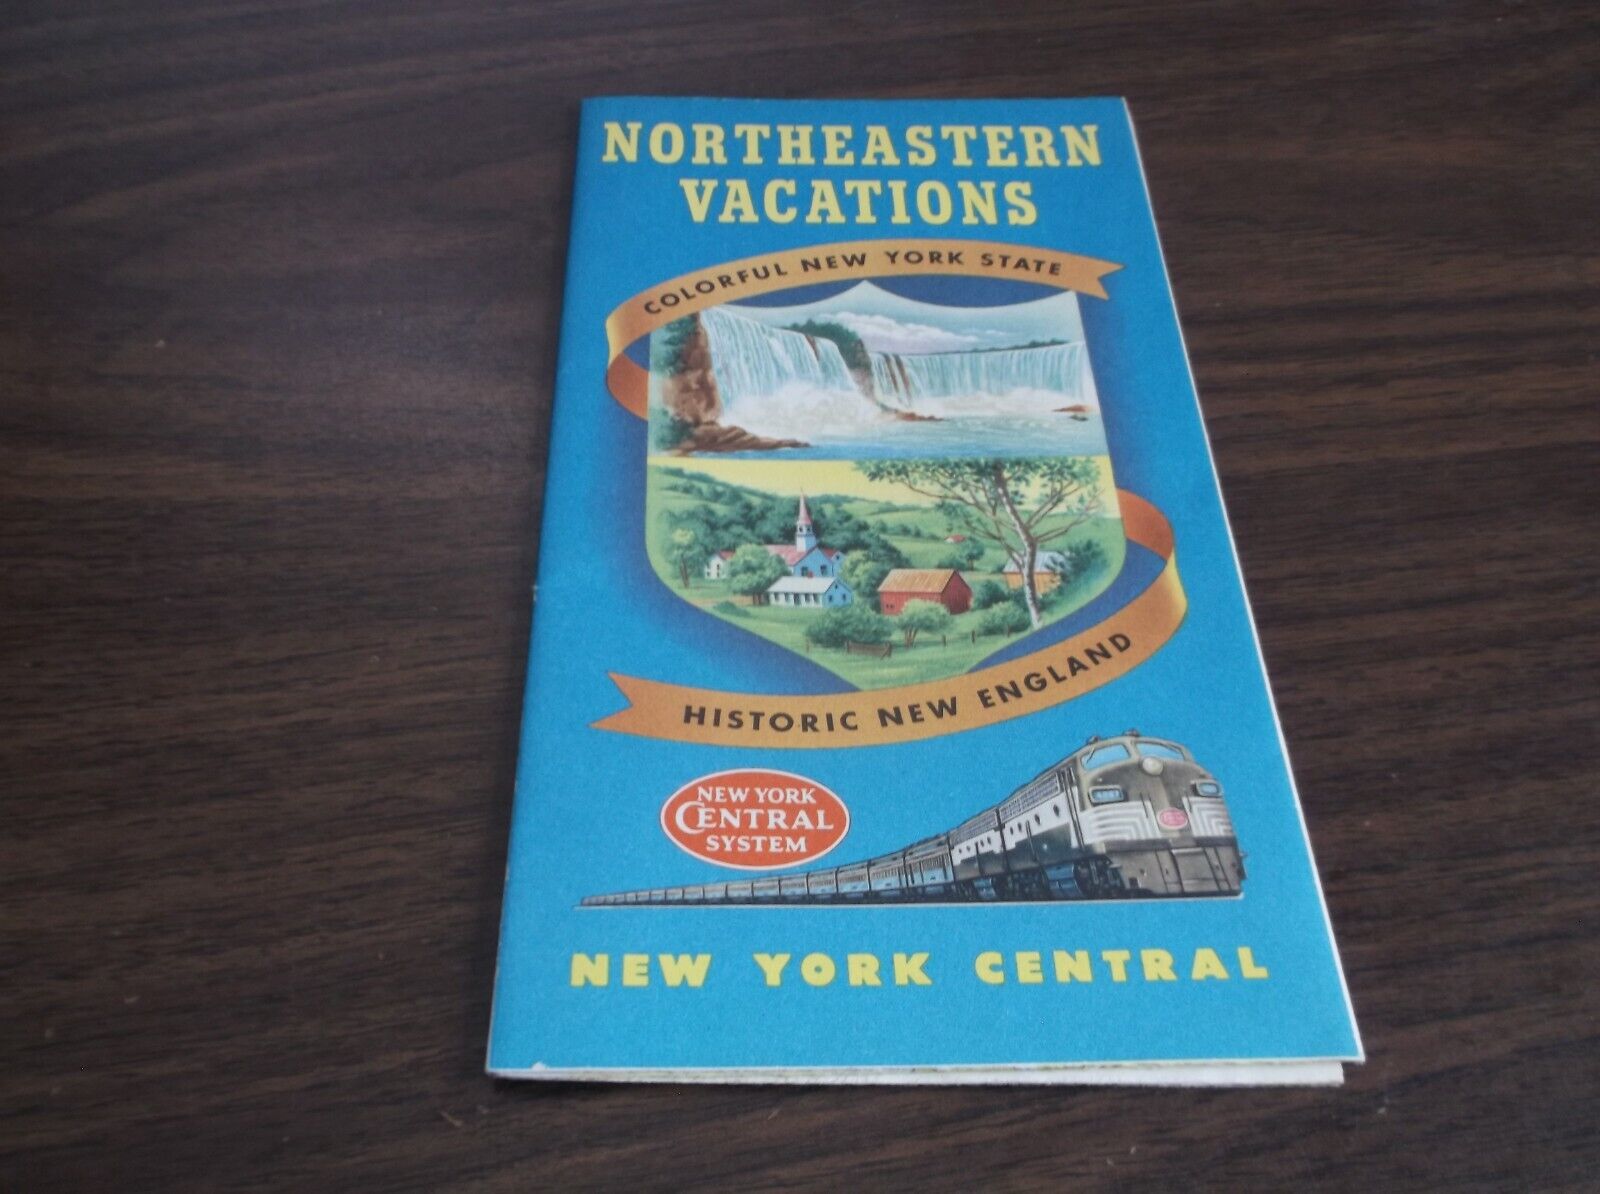 MARCH 1954 NEW YORK CENTRAL NYC NORTHEASTERN VACATION GUIDE BROCHURE